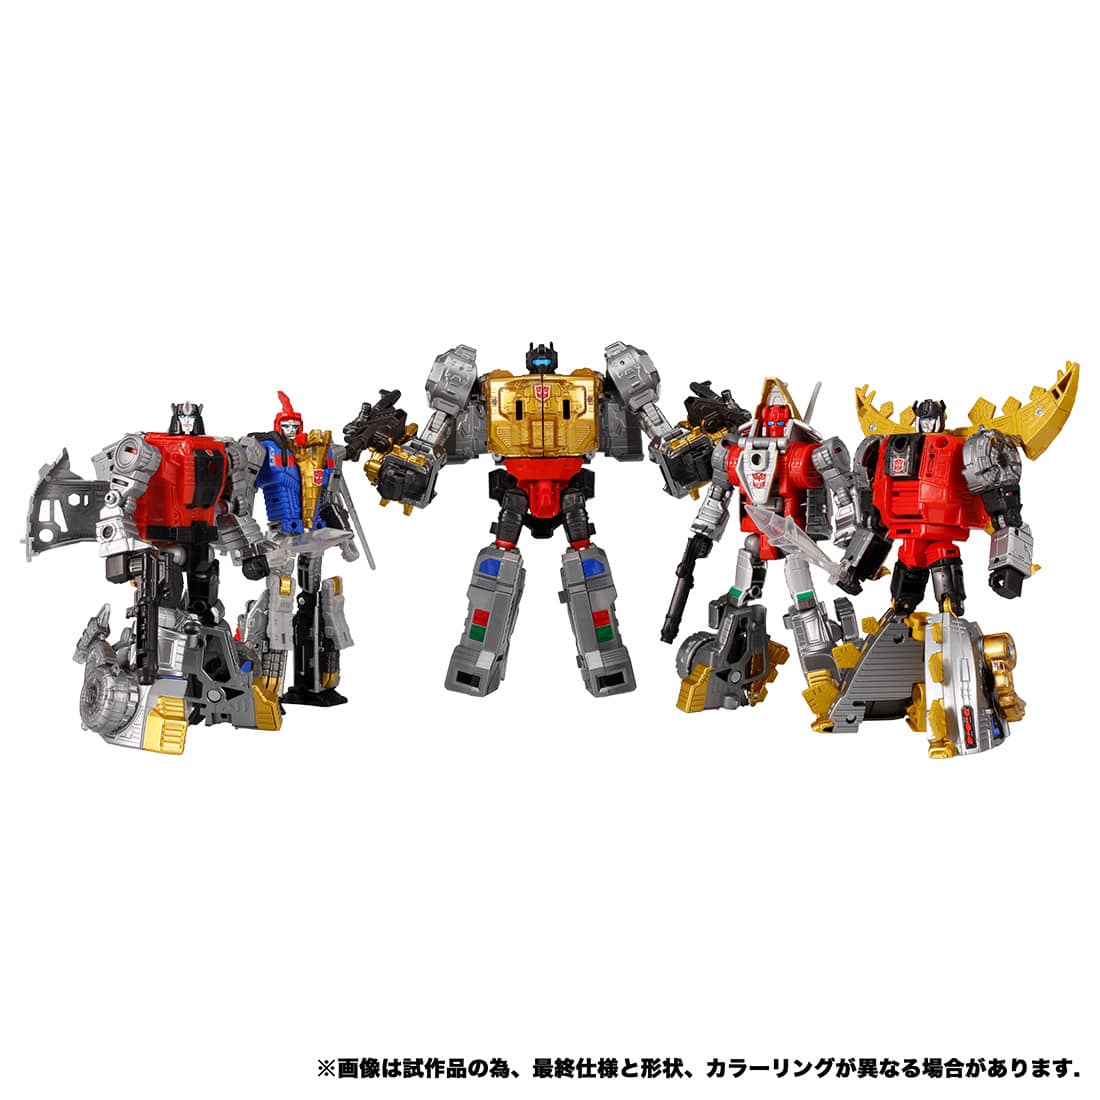 Details about   Transformation Generations Power of the Primes Volcanicus Dinobot Toy  IN STOCK